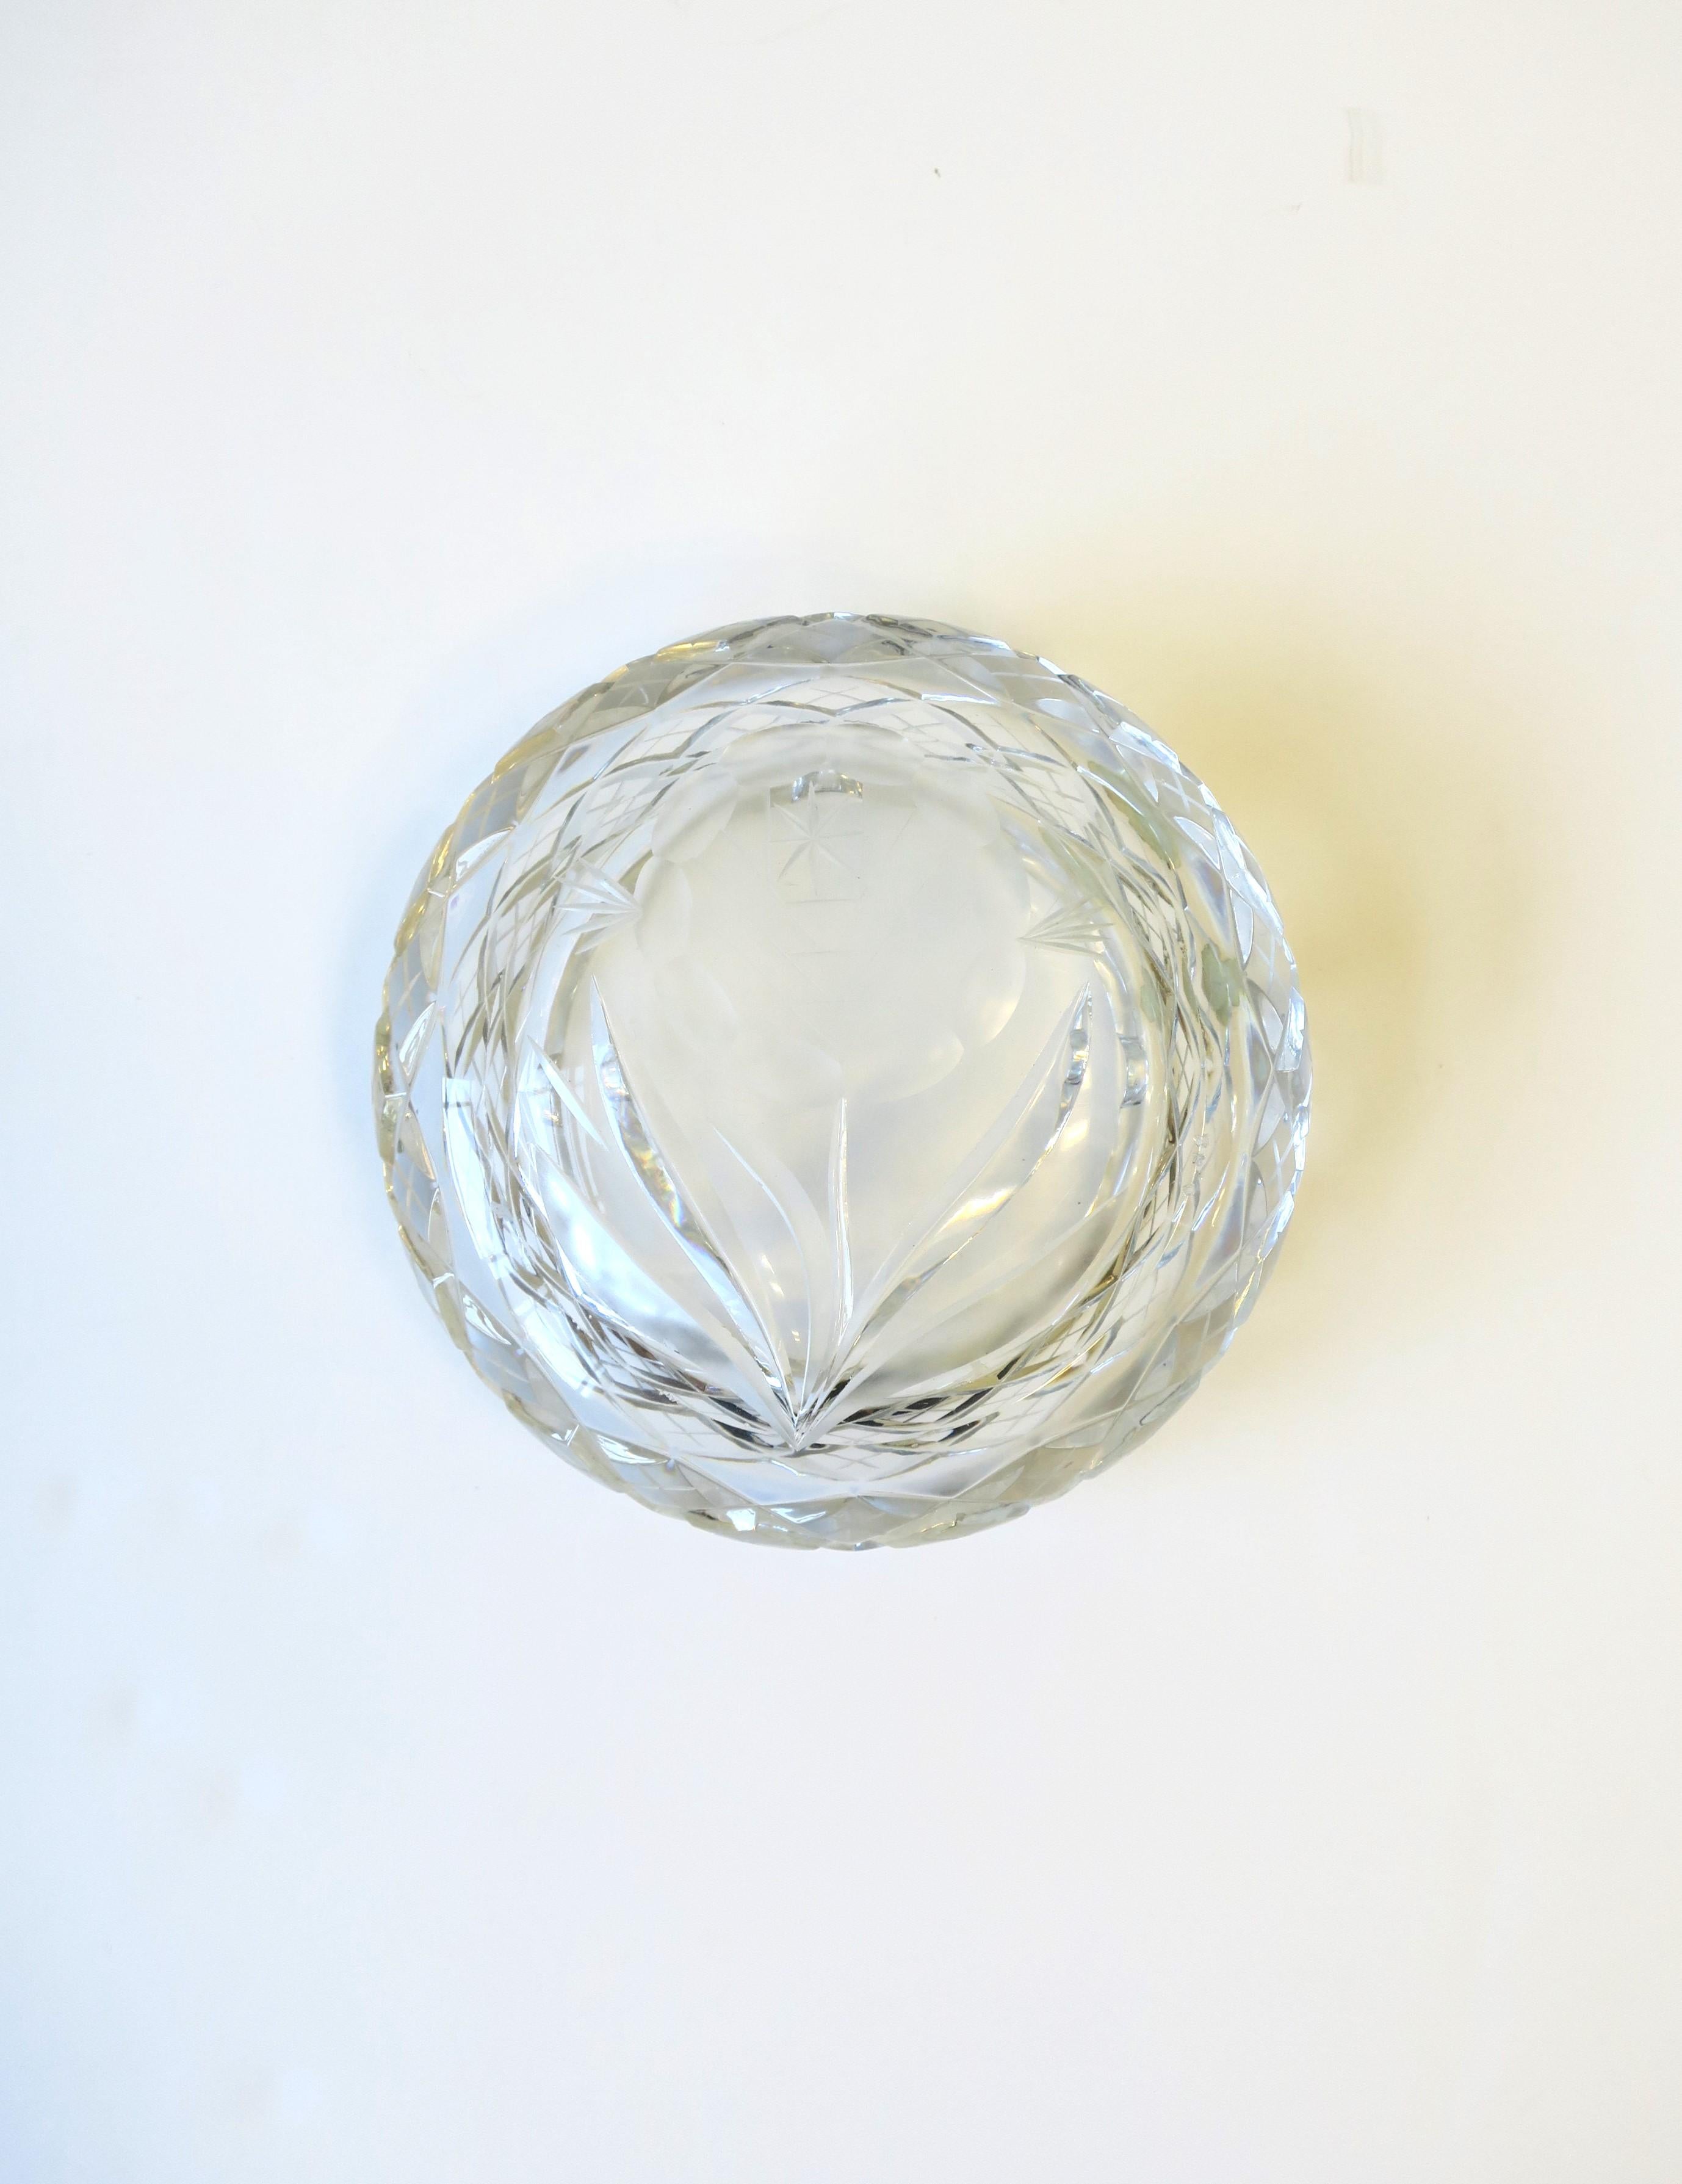 Bohemian Cut Crystal Bowl or Ashtray, Mid-20th, Czech For Sale 3